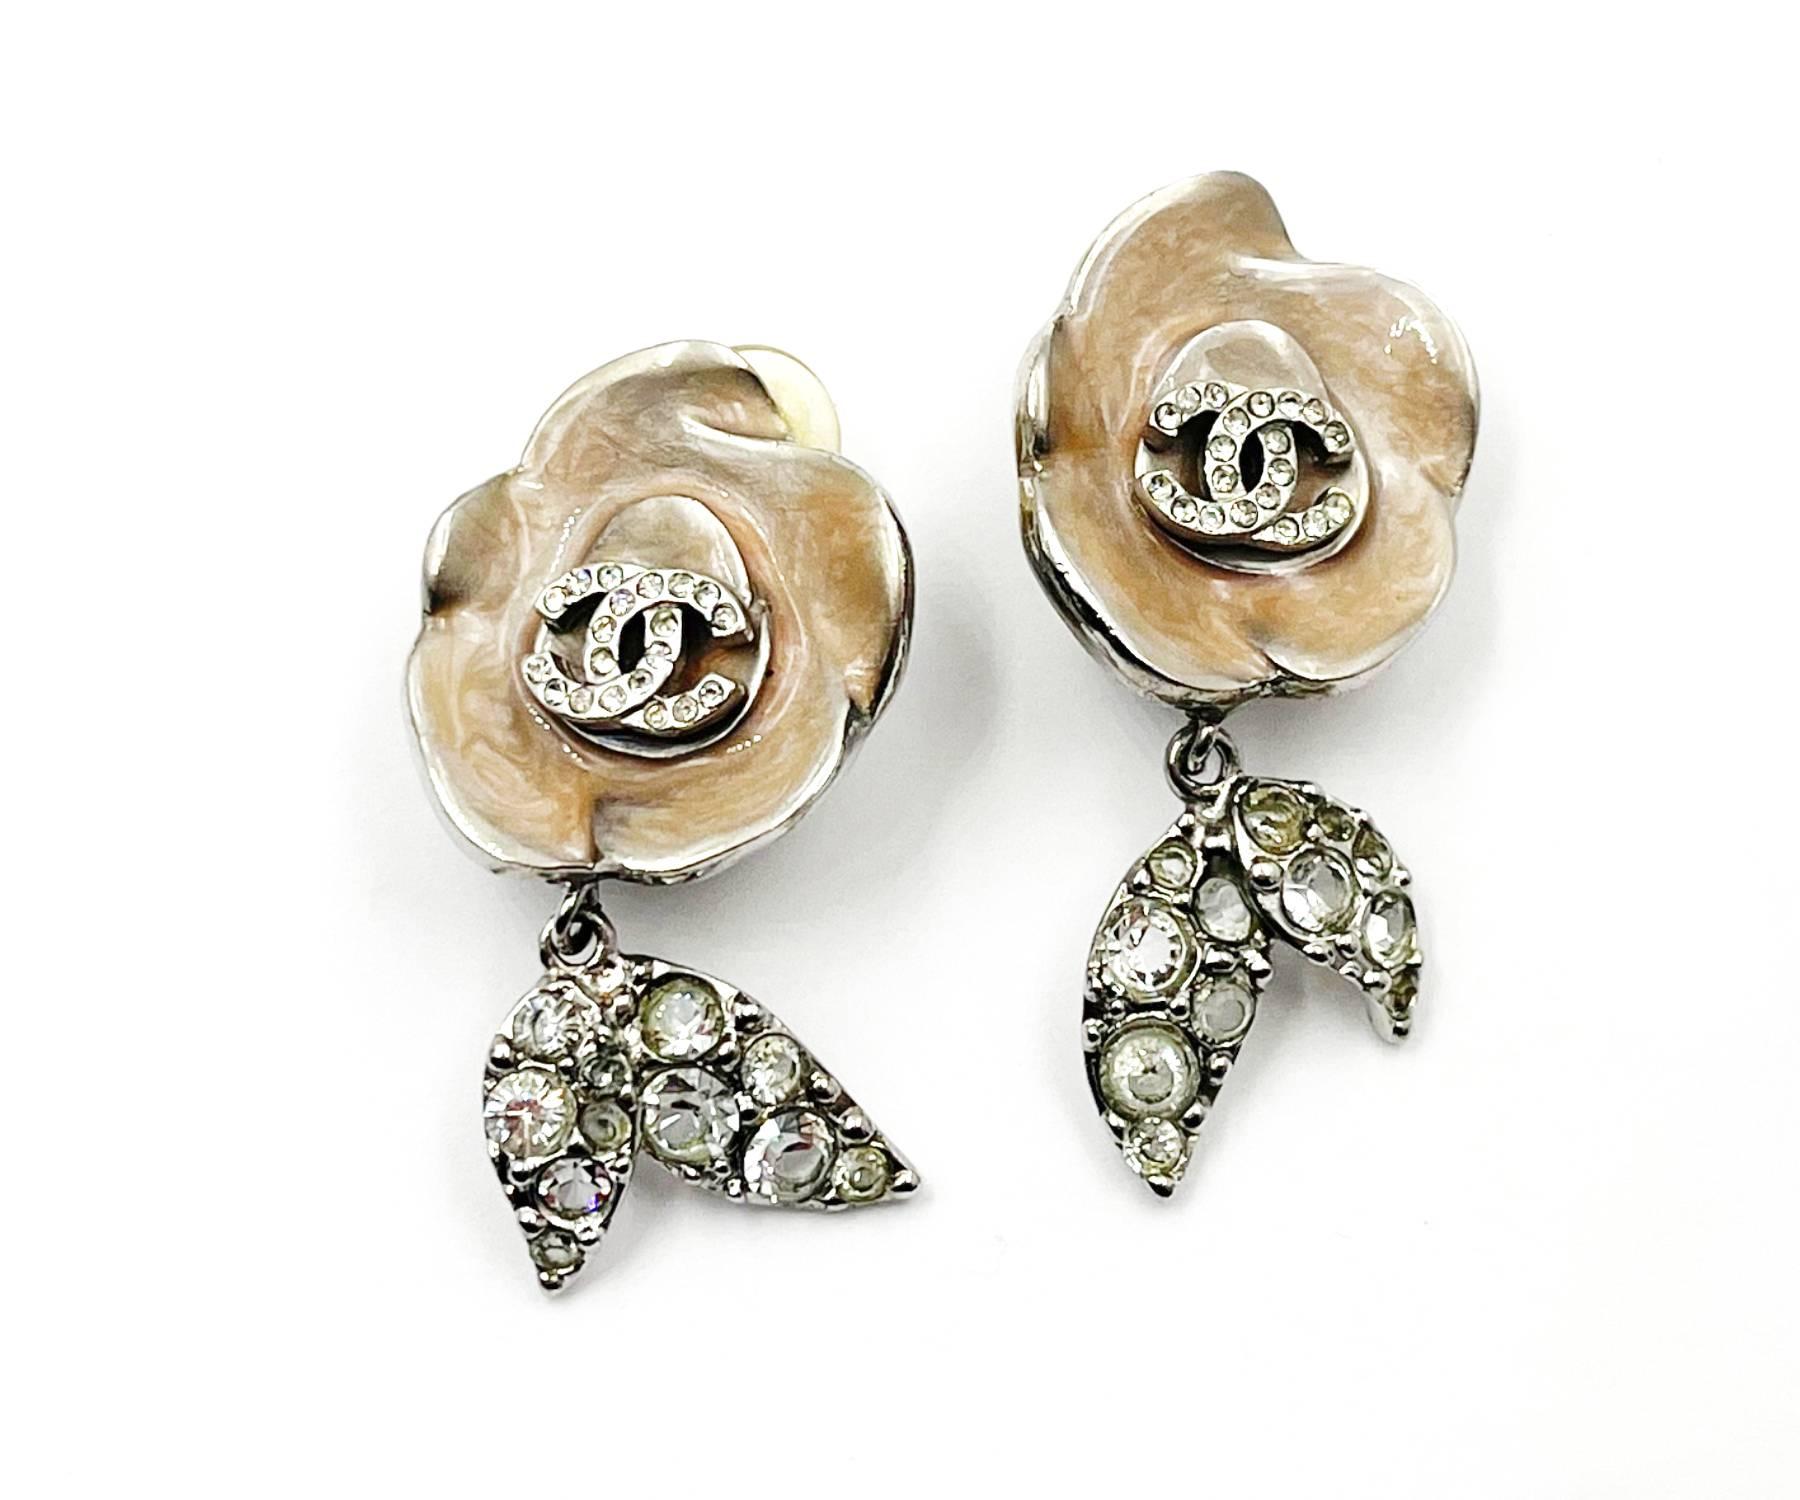 Chanel Silver CC Crystal Pink Enamel Flower Leaf Dangle Clip on Earrings

*Marked 04
*Made in France
*Comes with the original box

-Approximately 1.75